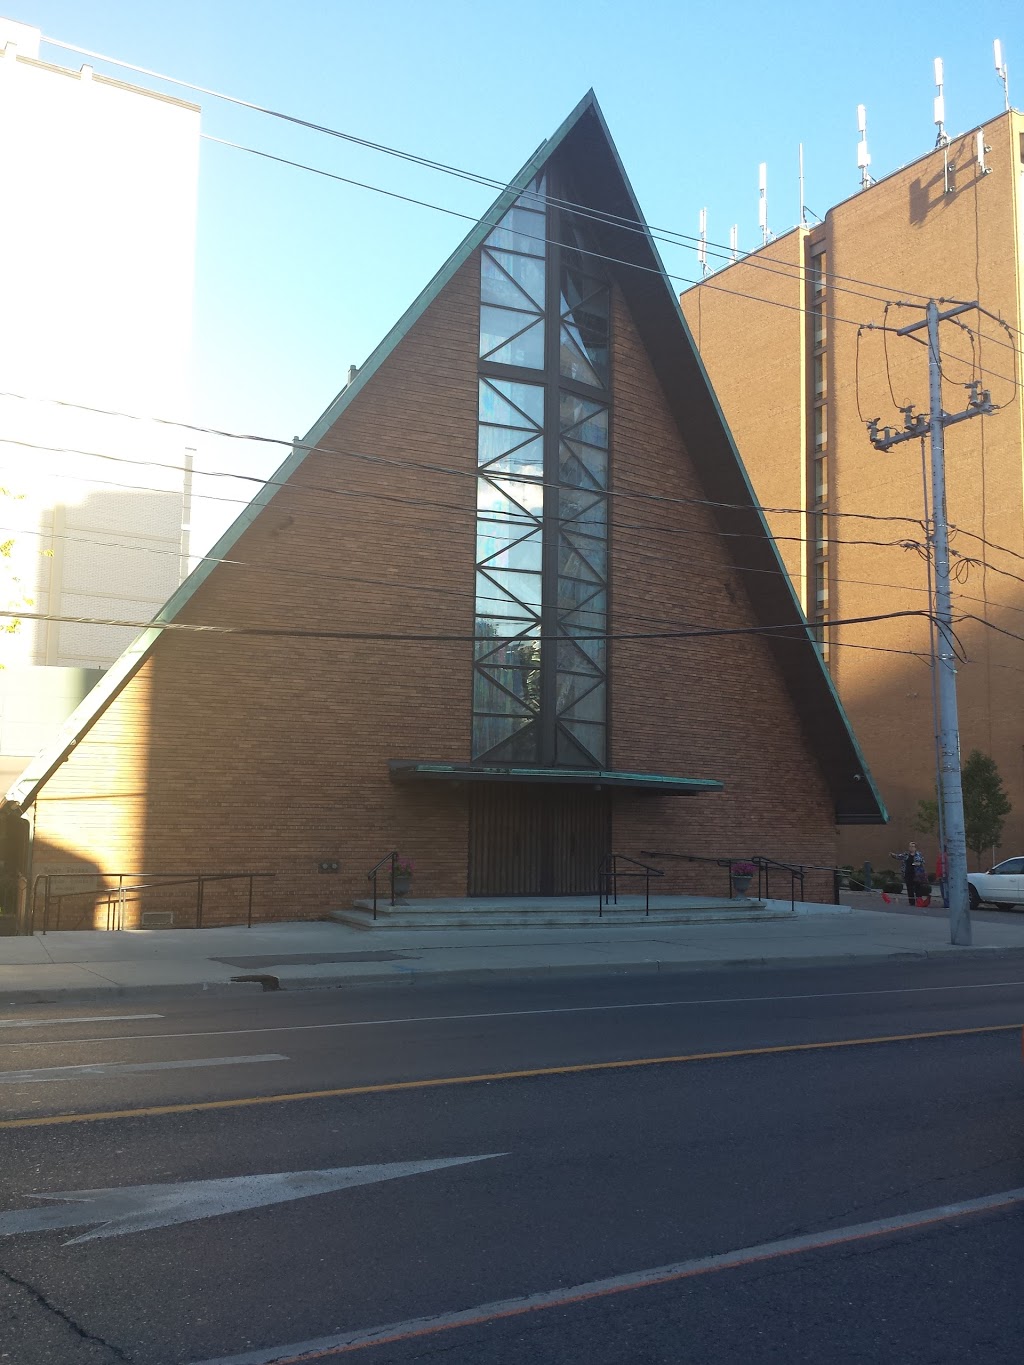 St. Peters Estonian Evangelical Lutheran Church of Toronto | church | 817 PLEASANT RD MOUNT, Toronto, ON M4P 2L1, Canada | 4164835847 OR +1 416-483-5847